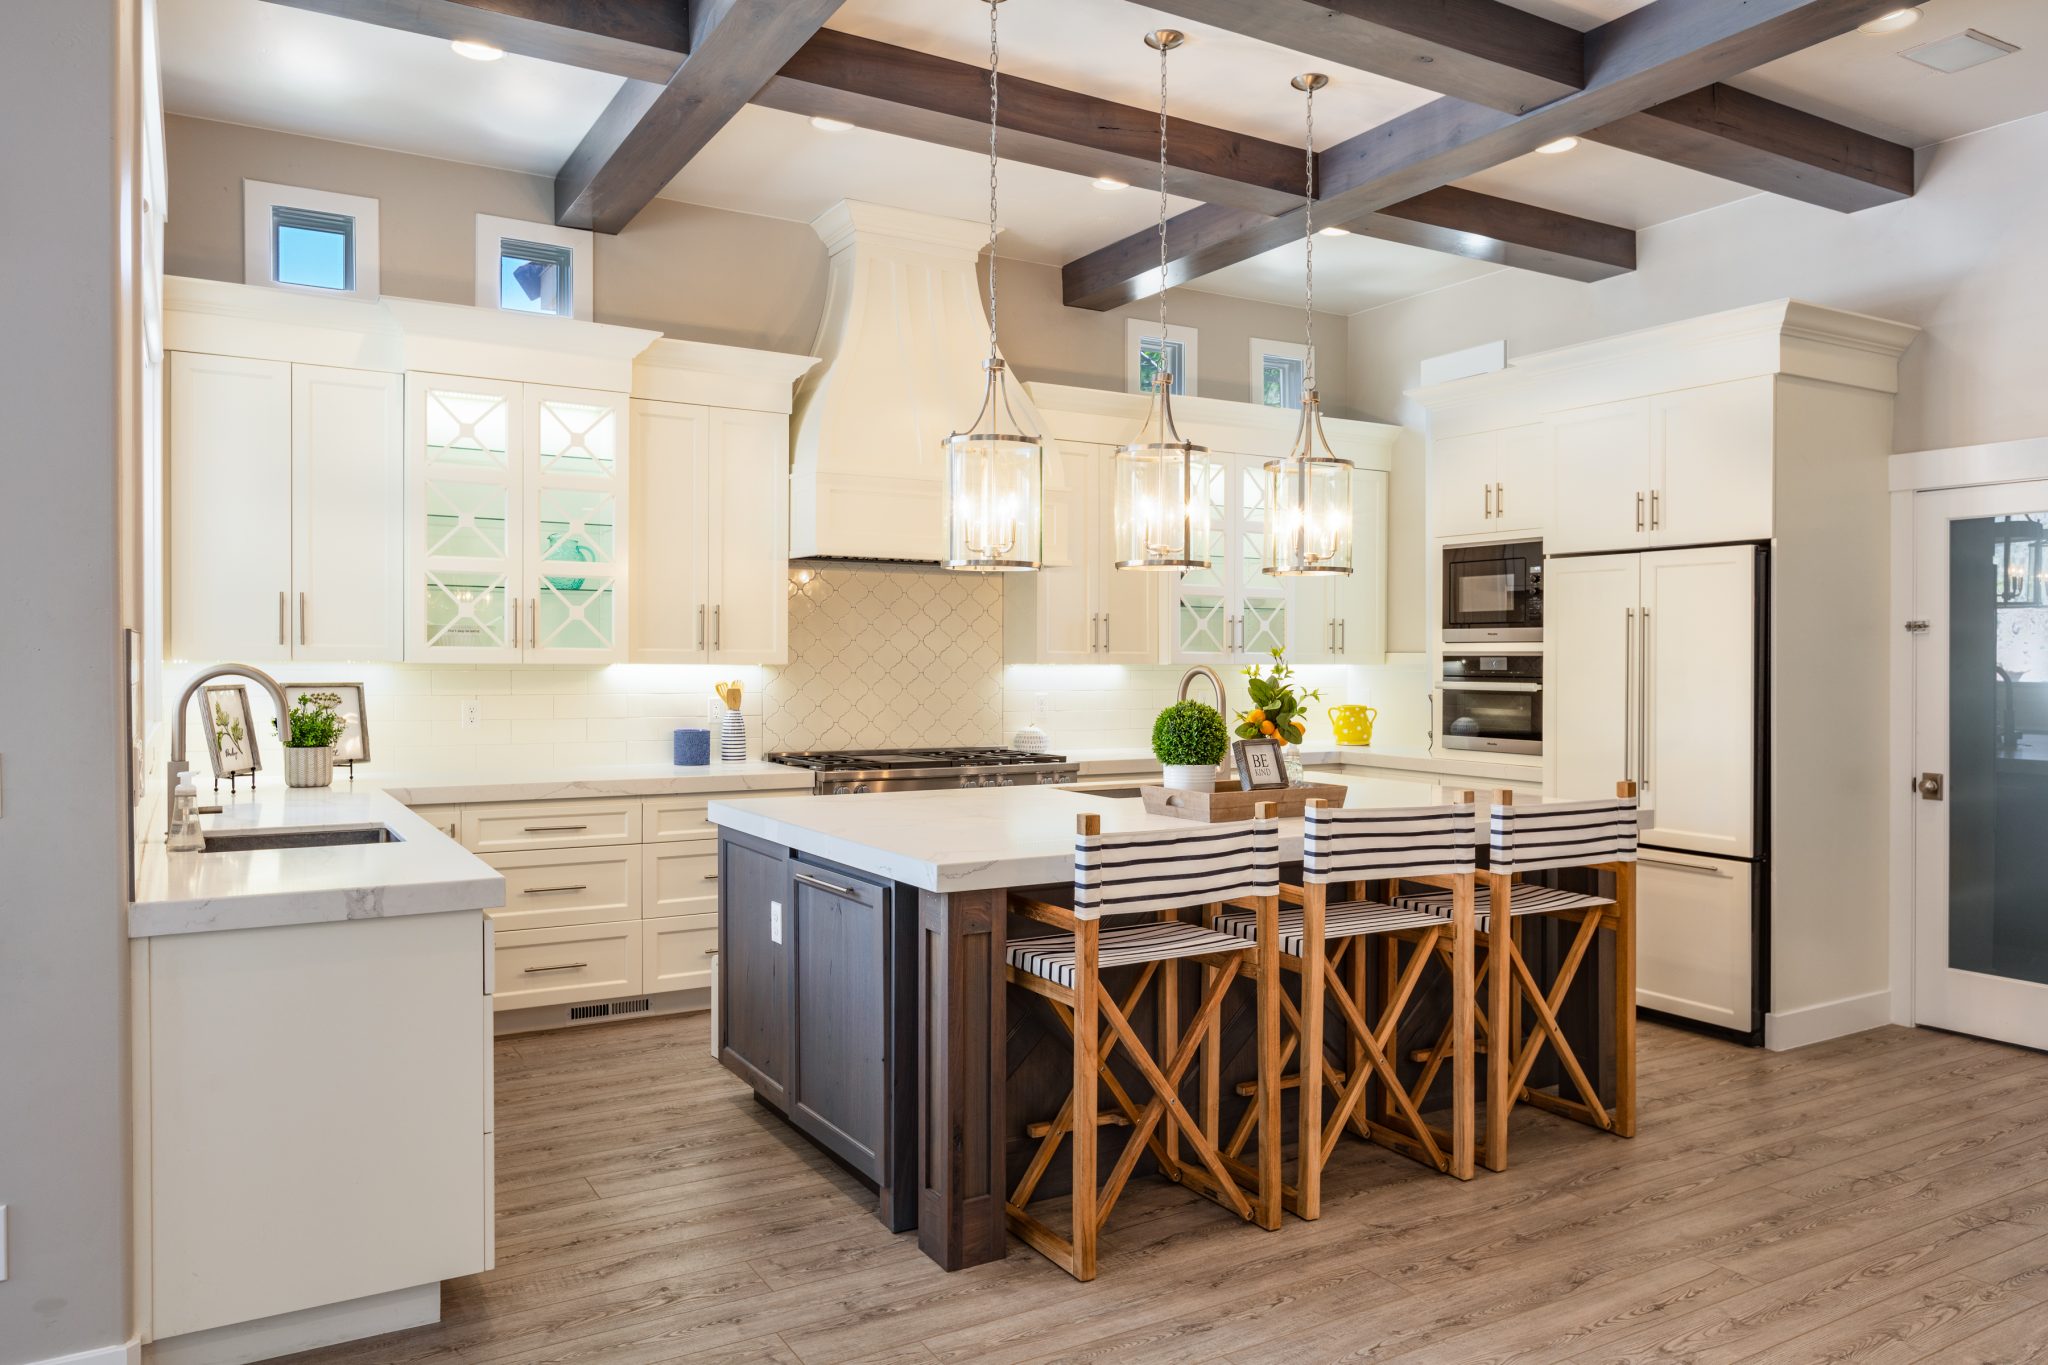 Home - Cabinets & Appliances for Contractors in St George Utah